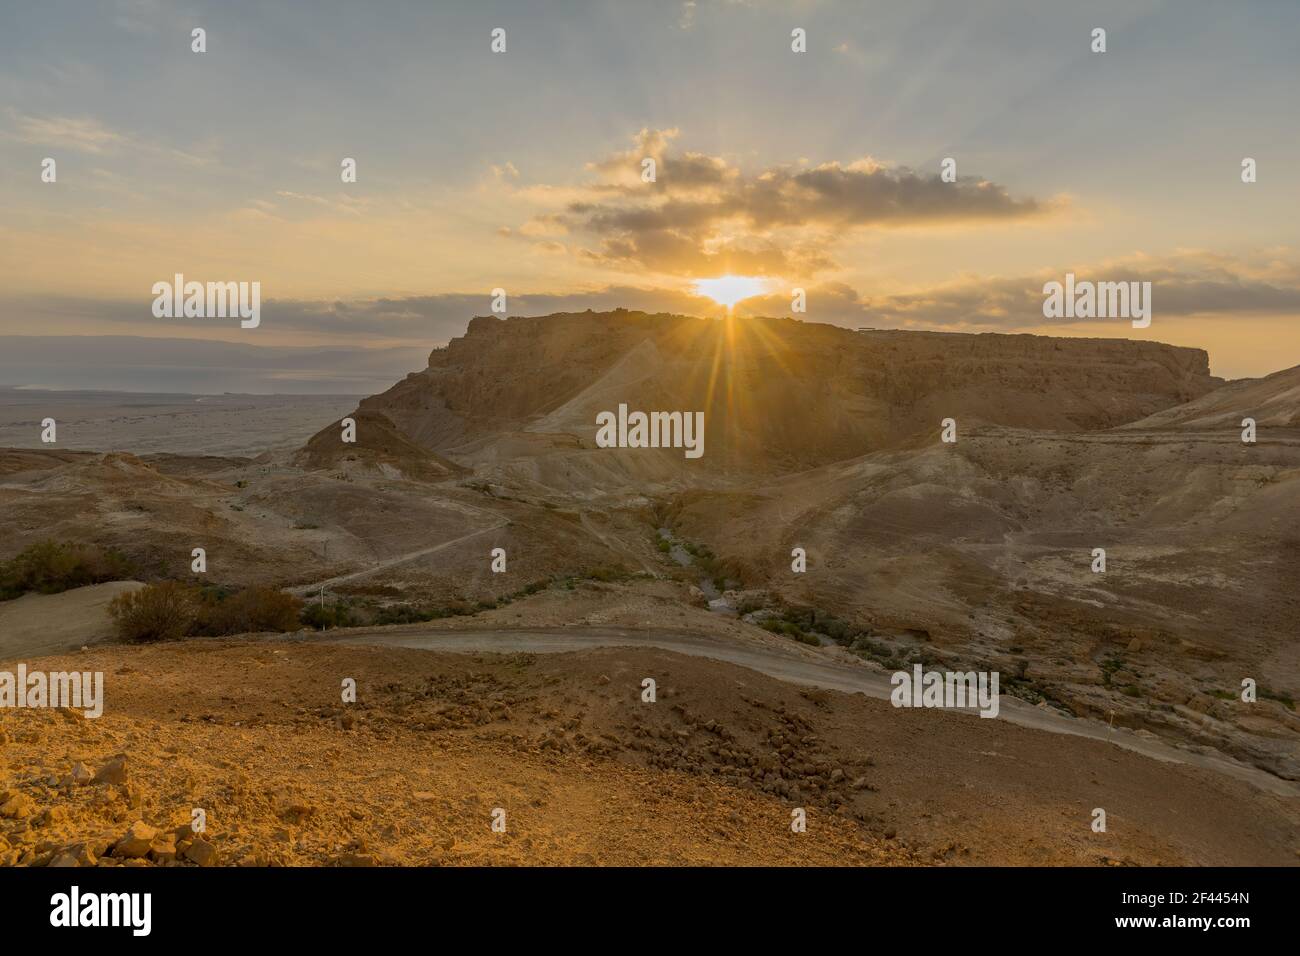 Sunrise view of the Masada fortress, the Judaean Desert, Southern Israel Stock Photo